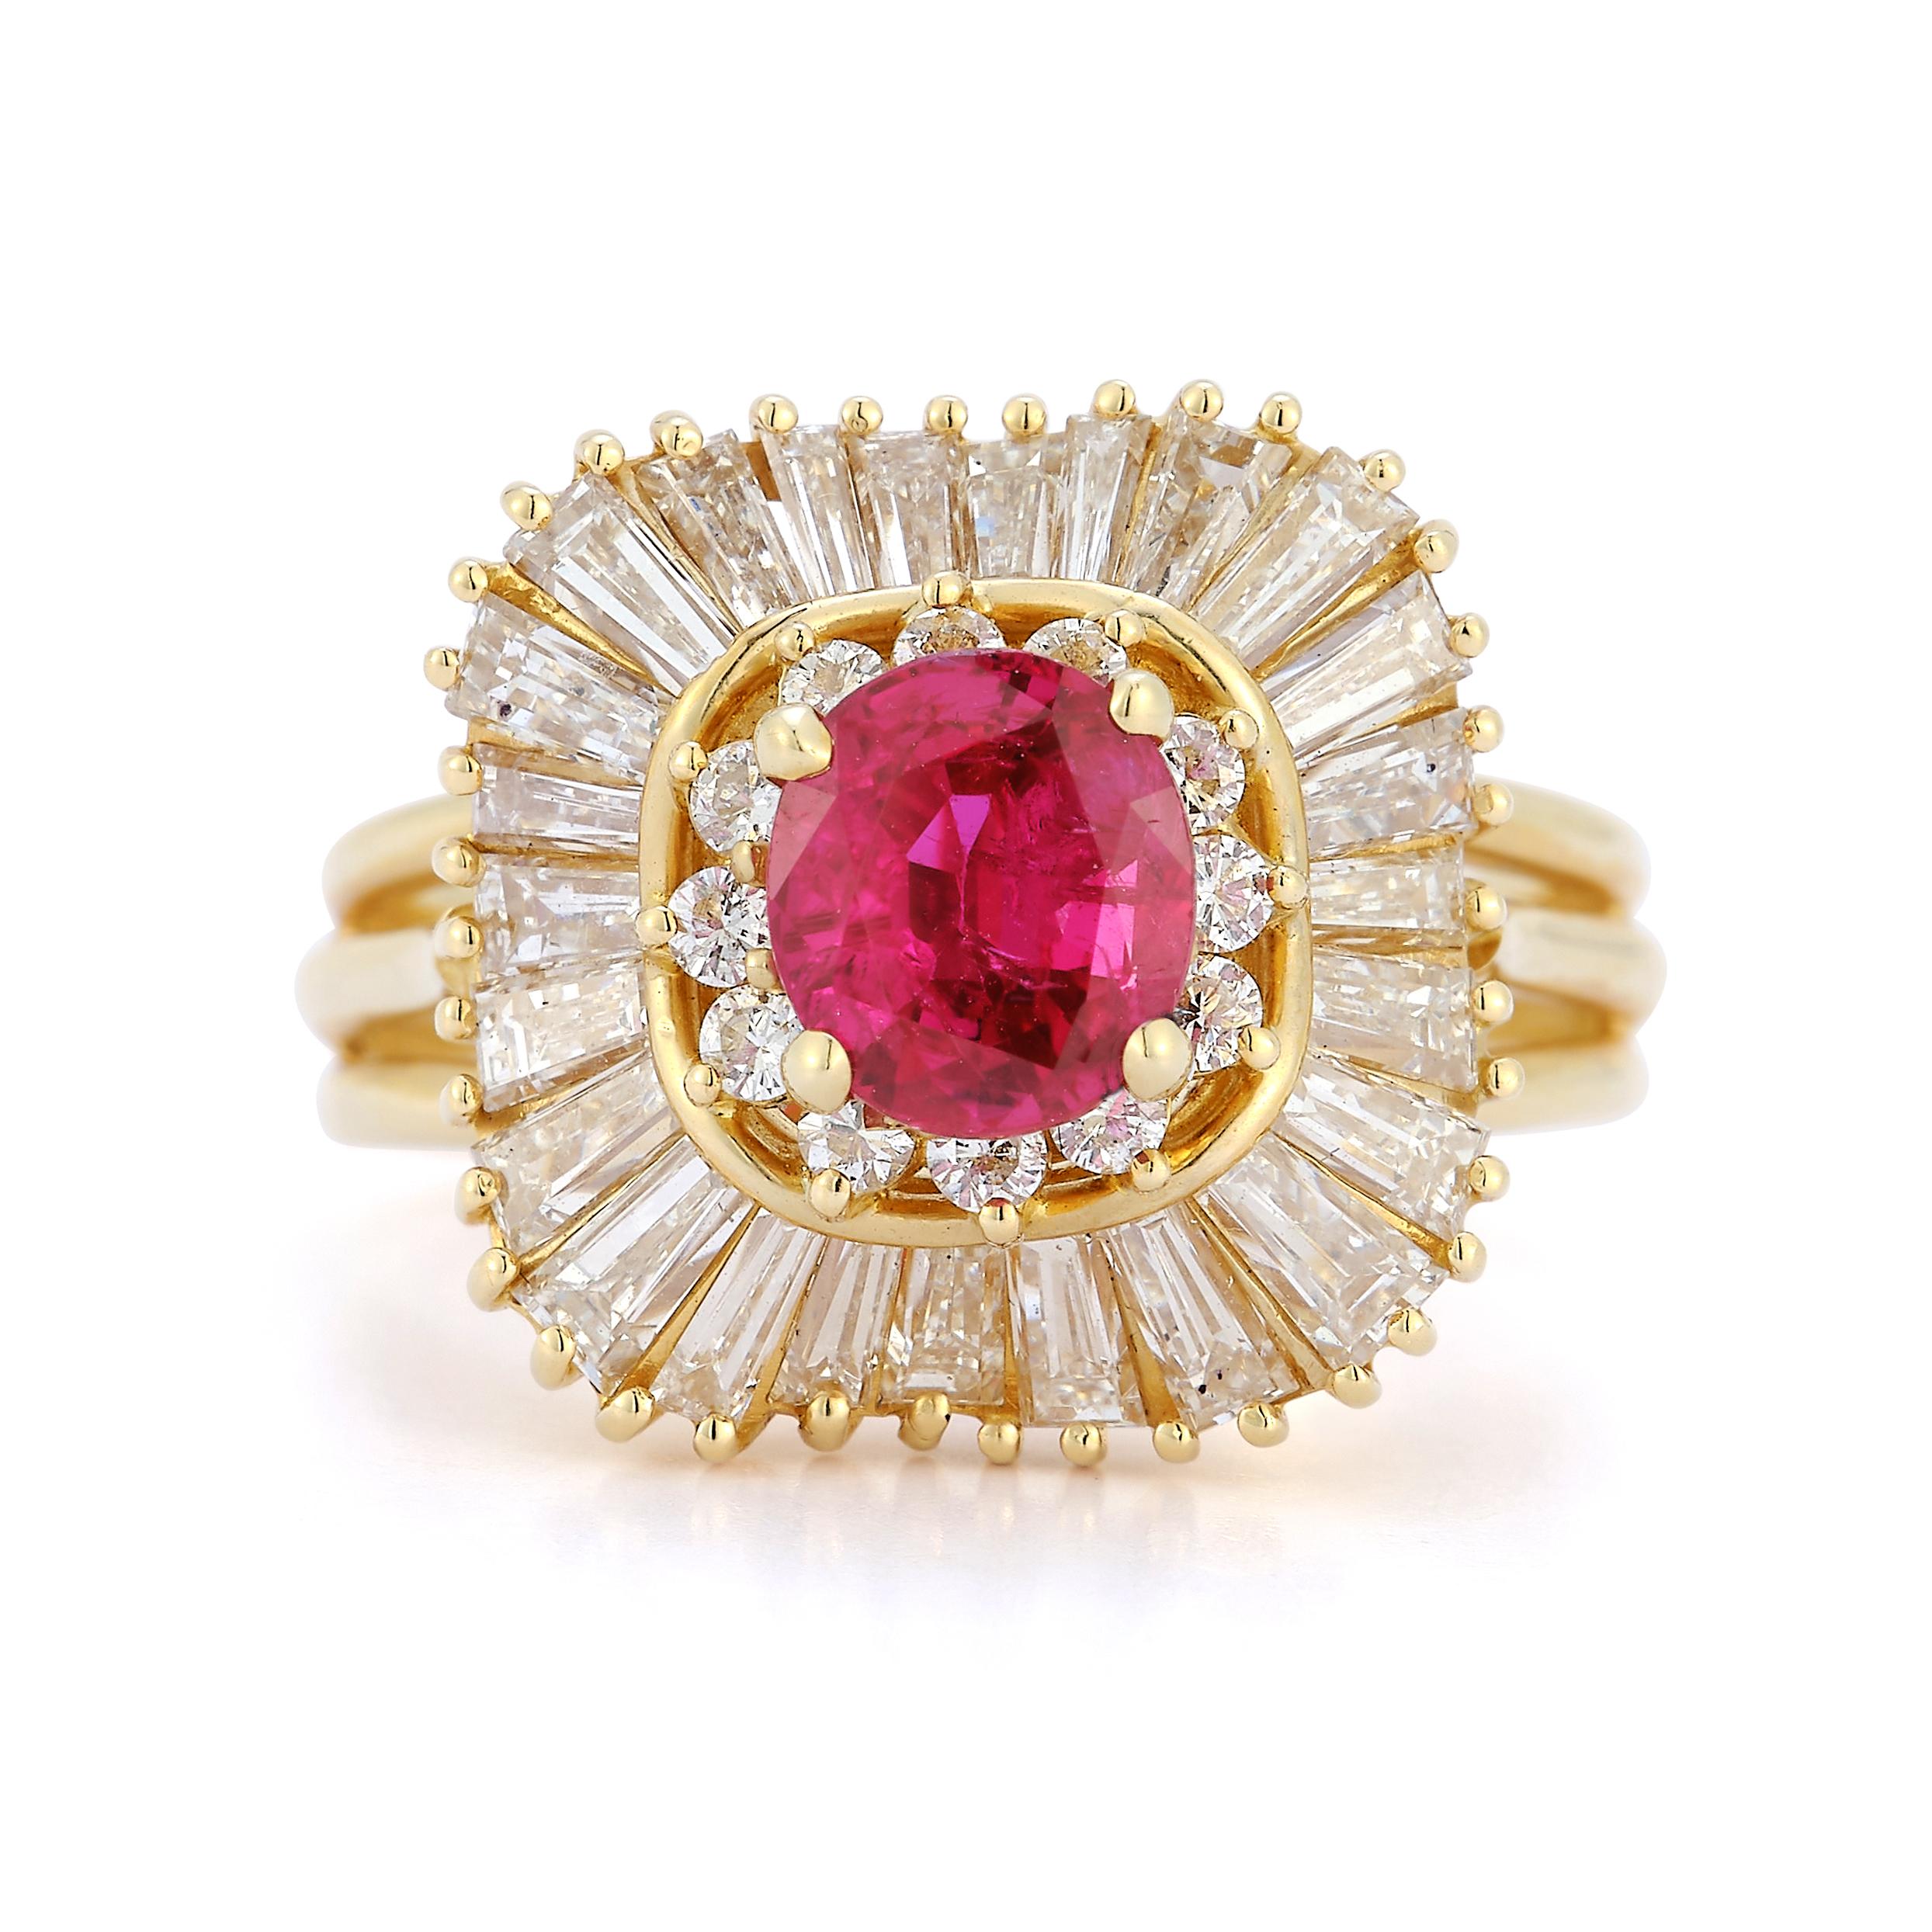 Ruby & Diamond Ballerina Ring, A ballerina ring with center oval ruby approximately  1.50 ct surrounded by 24 tapered baguette diamonds approximately 1.85 ct and 12 brilliant diamonds approximately .21 ct

Ring Size: 6.5

14 karat yellow gold